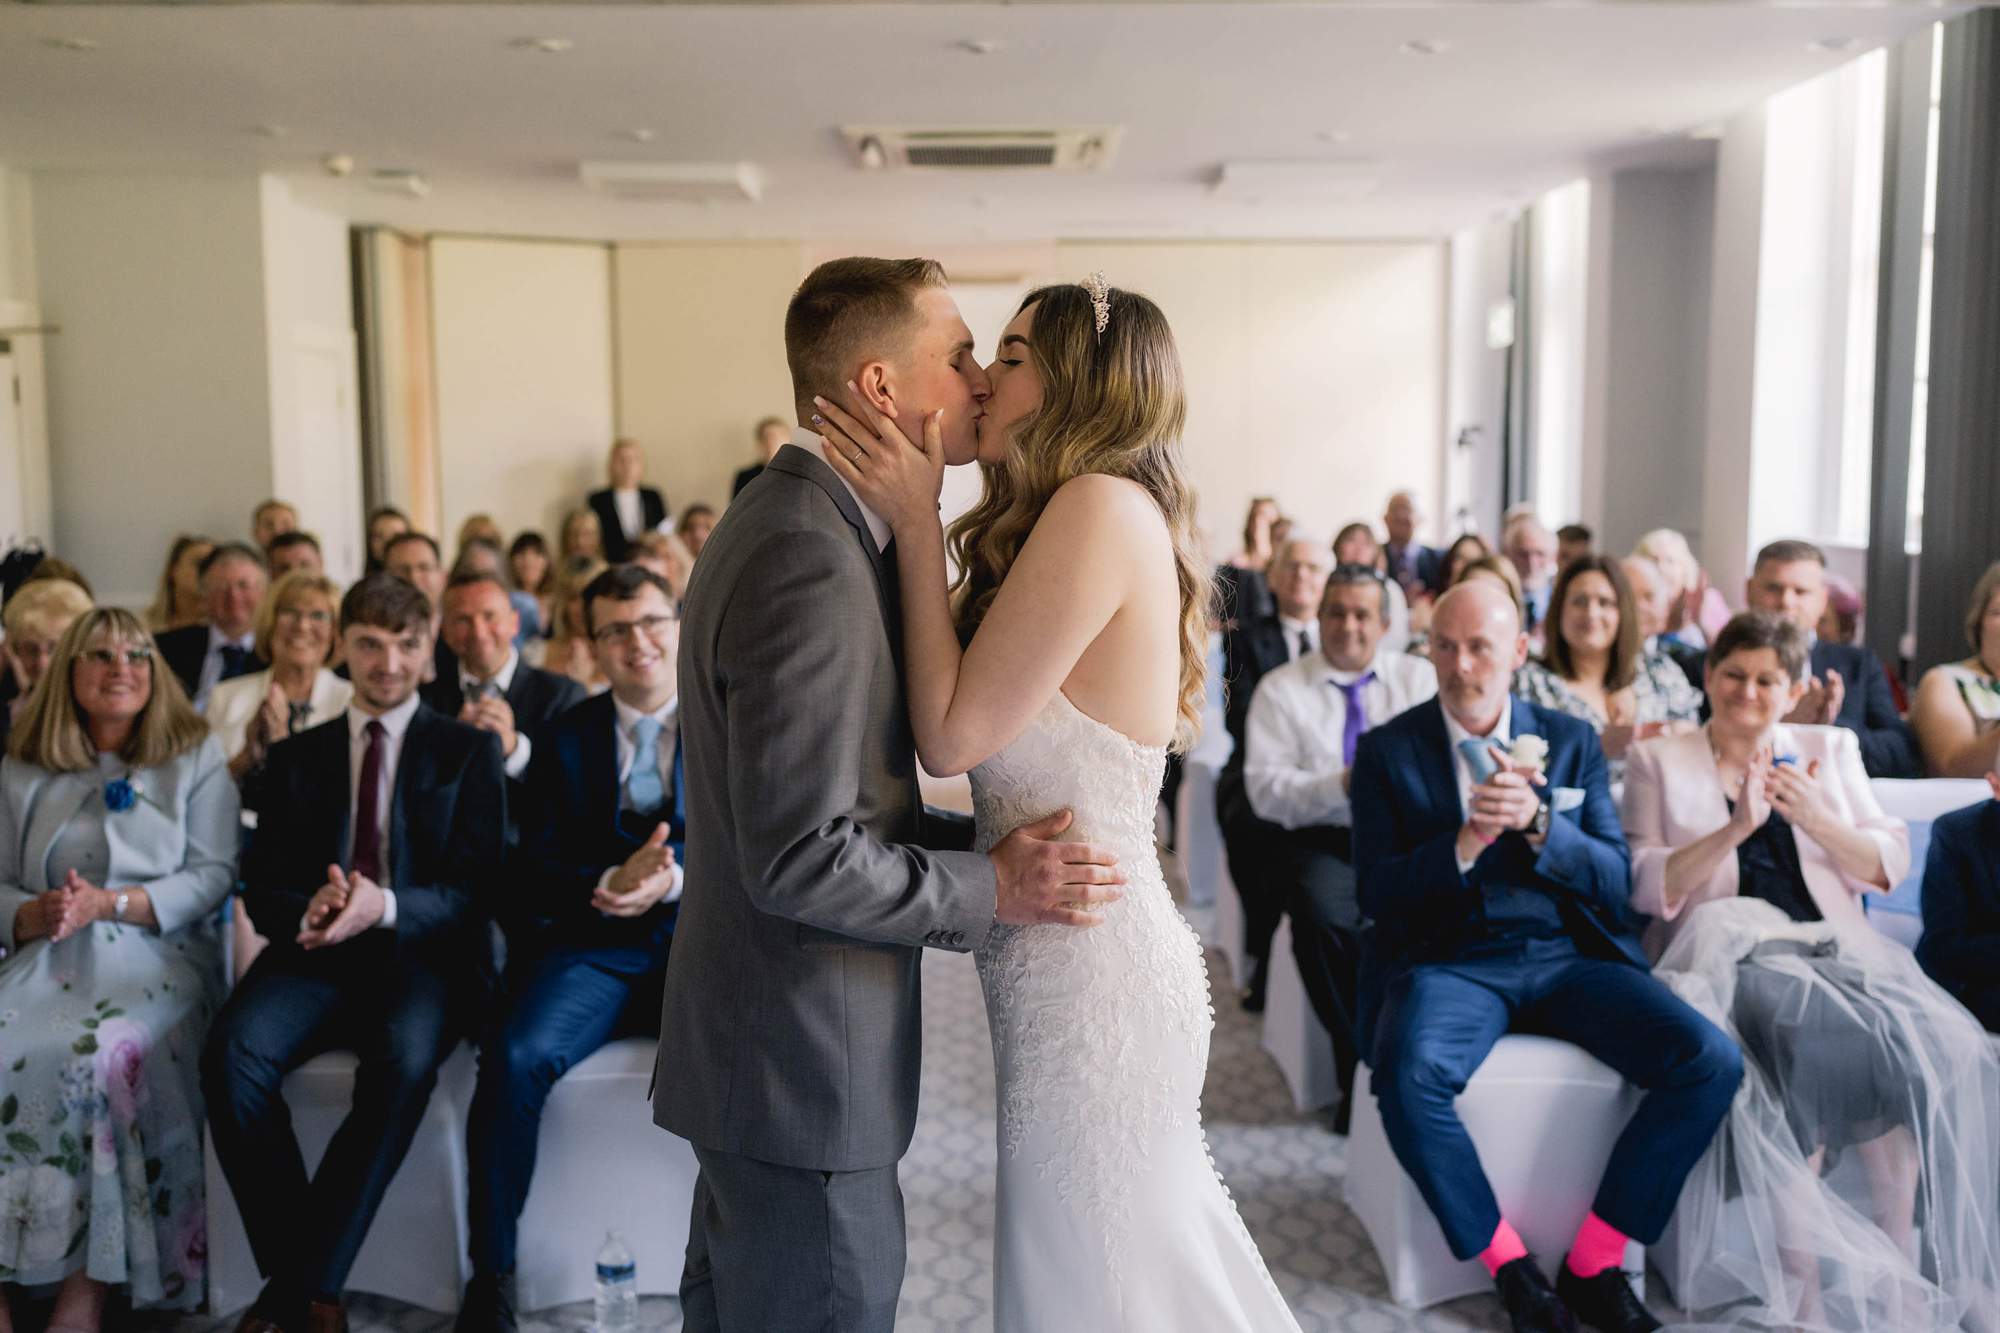 Newly wedded couple kiss during their wedding ceremony at the Avisford Park Hotel in Arundel, West Sussex.